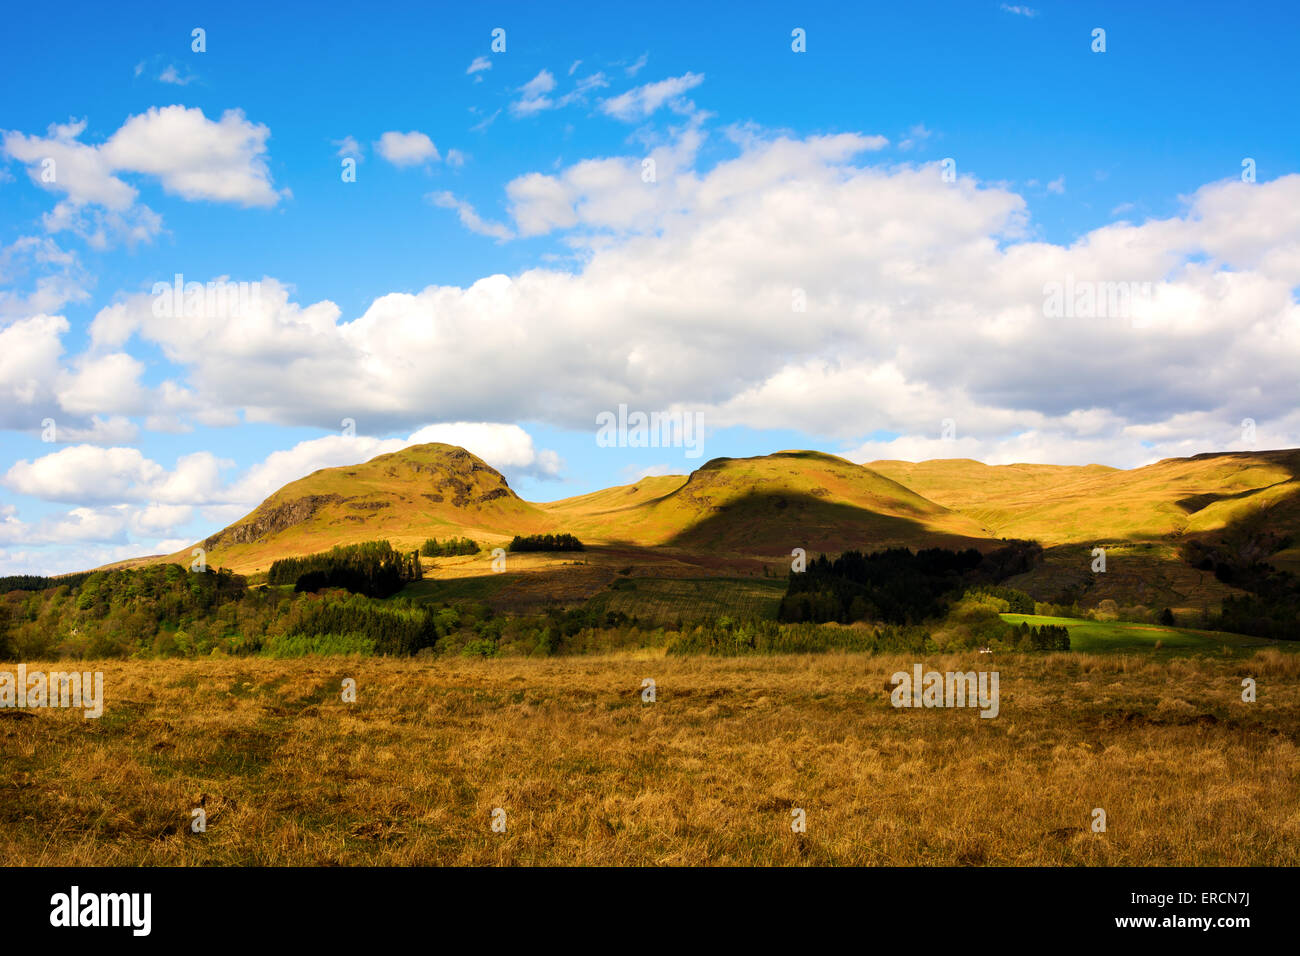 Beautiful rural landscape in Scottish Highlands with field patches, forests, and meadows. Beautiful blue sky with clouds Stock Photo